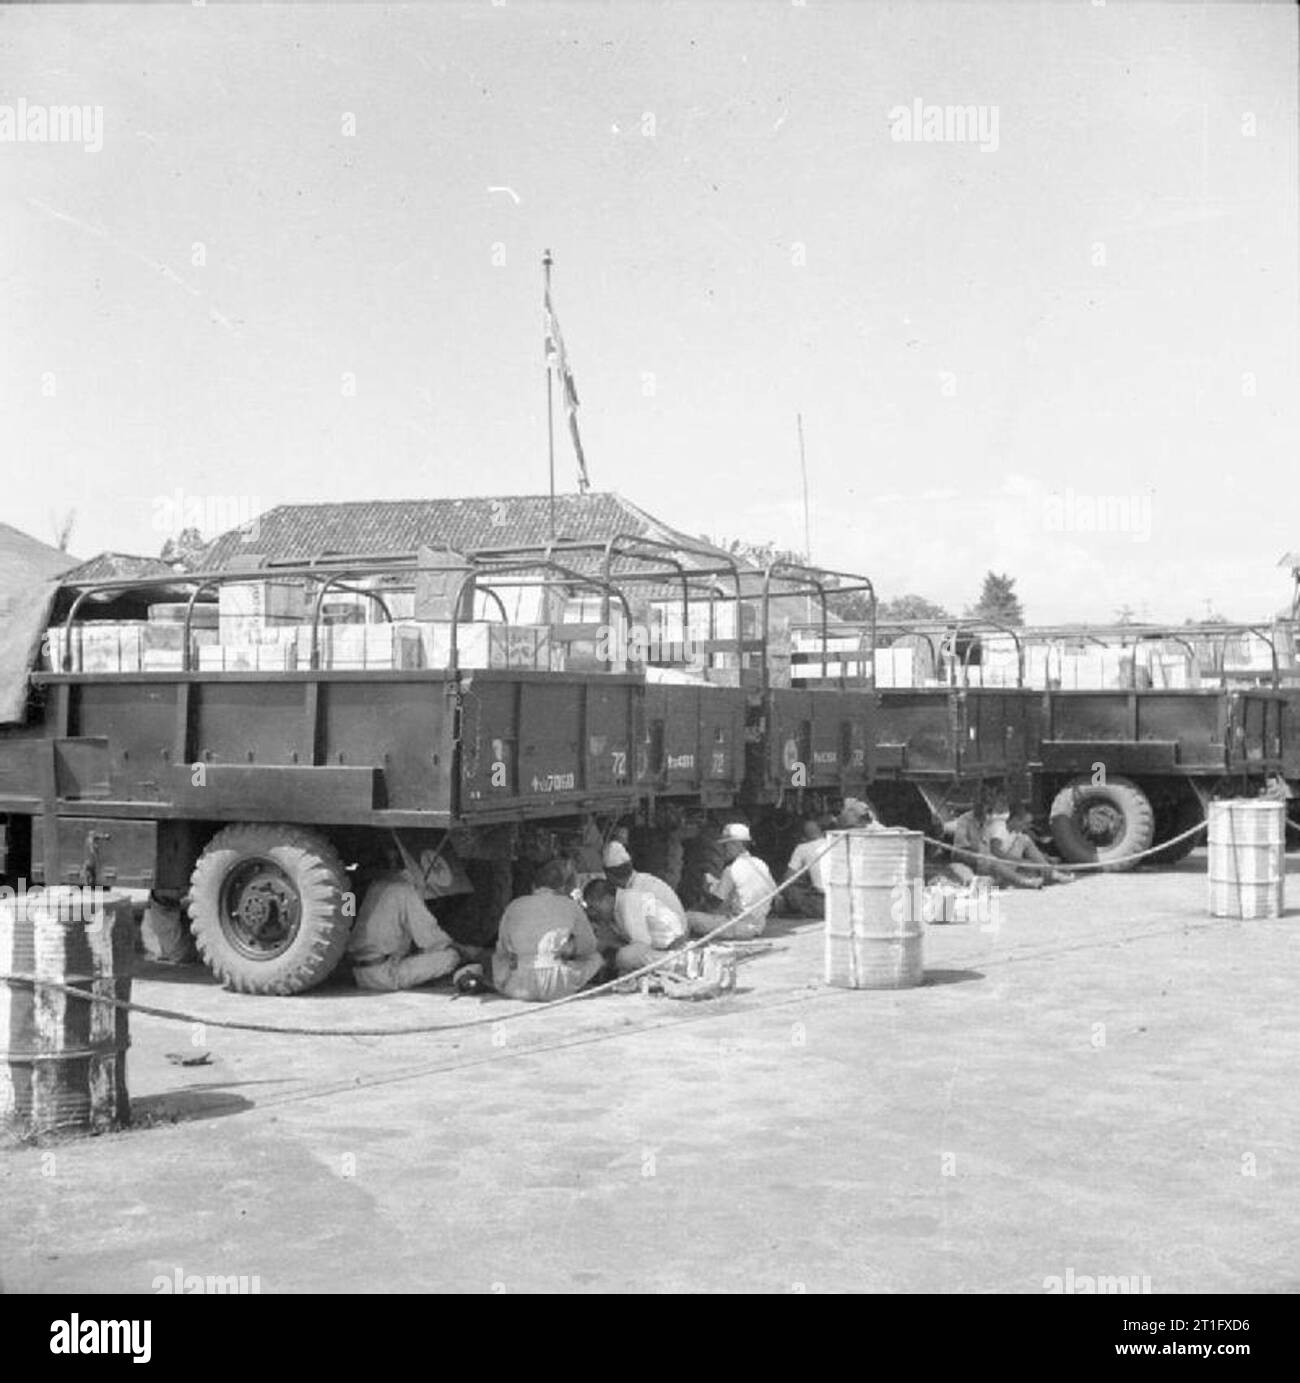 The British Occupation of Java Japanese prisoners of war sit in the shade of lorries they have just loaded with some of the 100 tons of supplies flown daily into the city of Bandoeng by Dakota aircraft of 31 Squadron, Royal Air Force. Due to ambushes and sabotage by Indonesian nationalists on the roads between Batavia and Bandoeng, the only secure supply route to the latter city was by air. Stock Photo